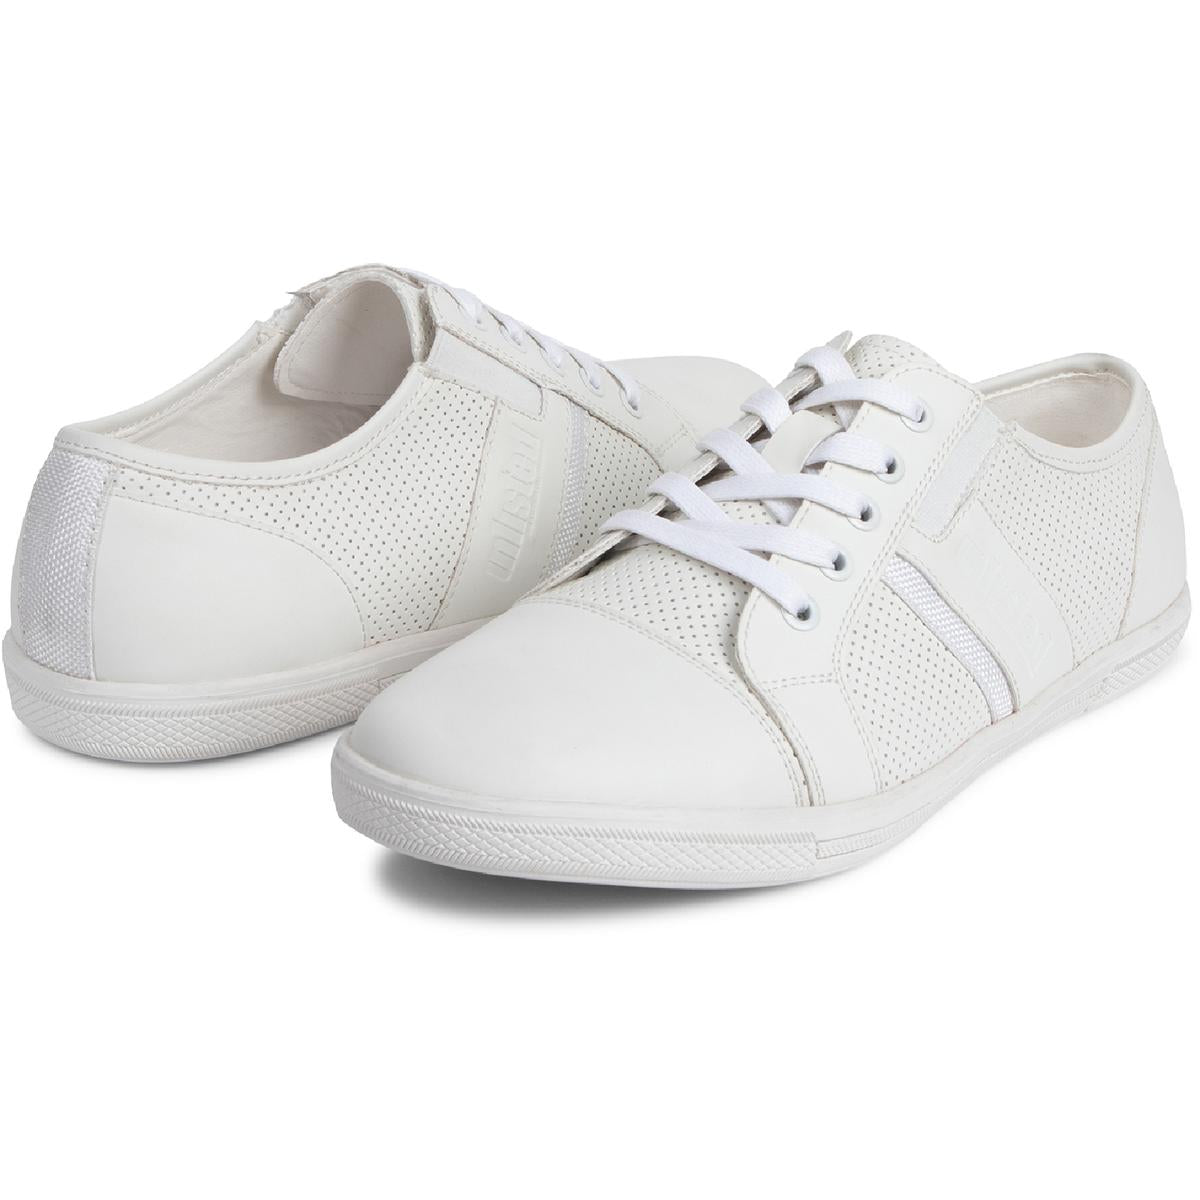 Kenneth Cole Sneakers For Men - Buy Kenneth Cole Sneakers For Men Online at  Best Price - Shop Online for Footwears in India | Flipkart.com